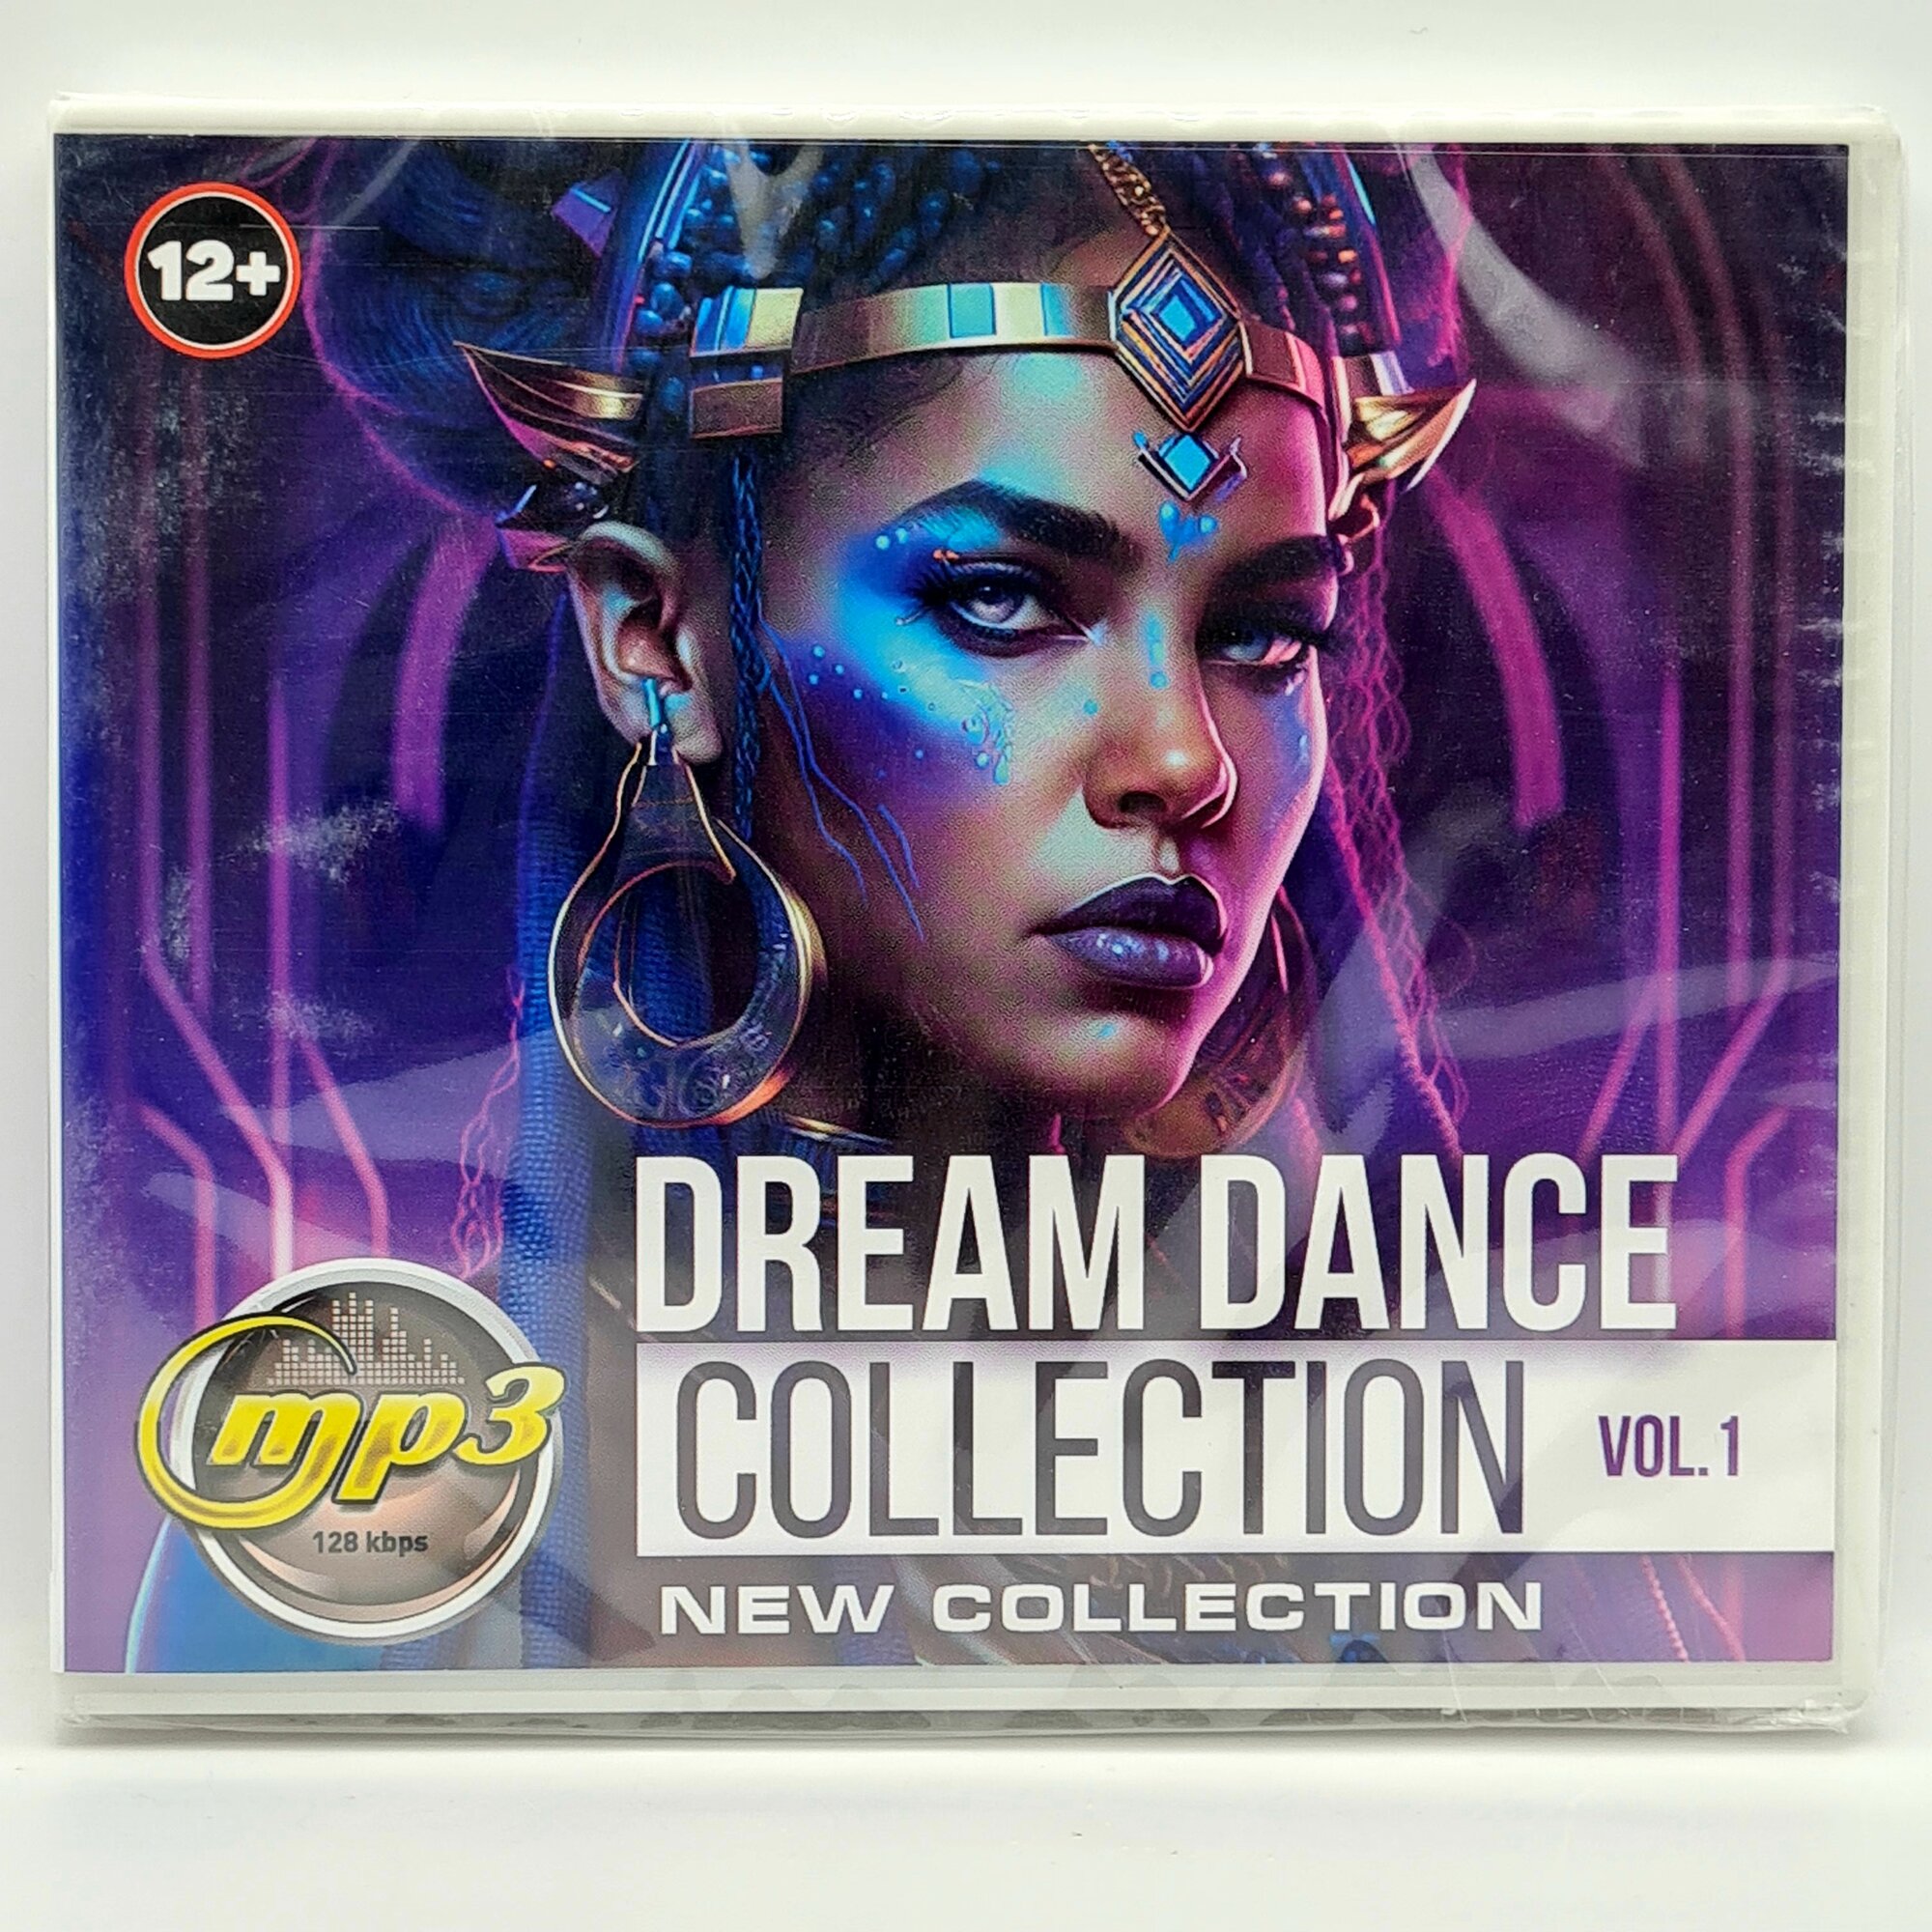 Dream Dance Collection - New Collection Vol.1 (MP3)